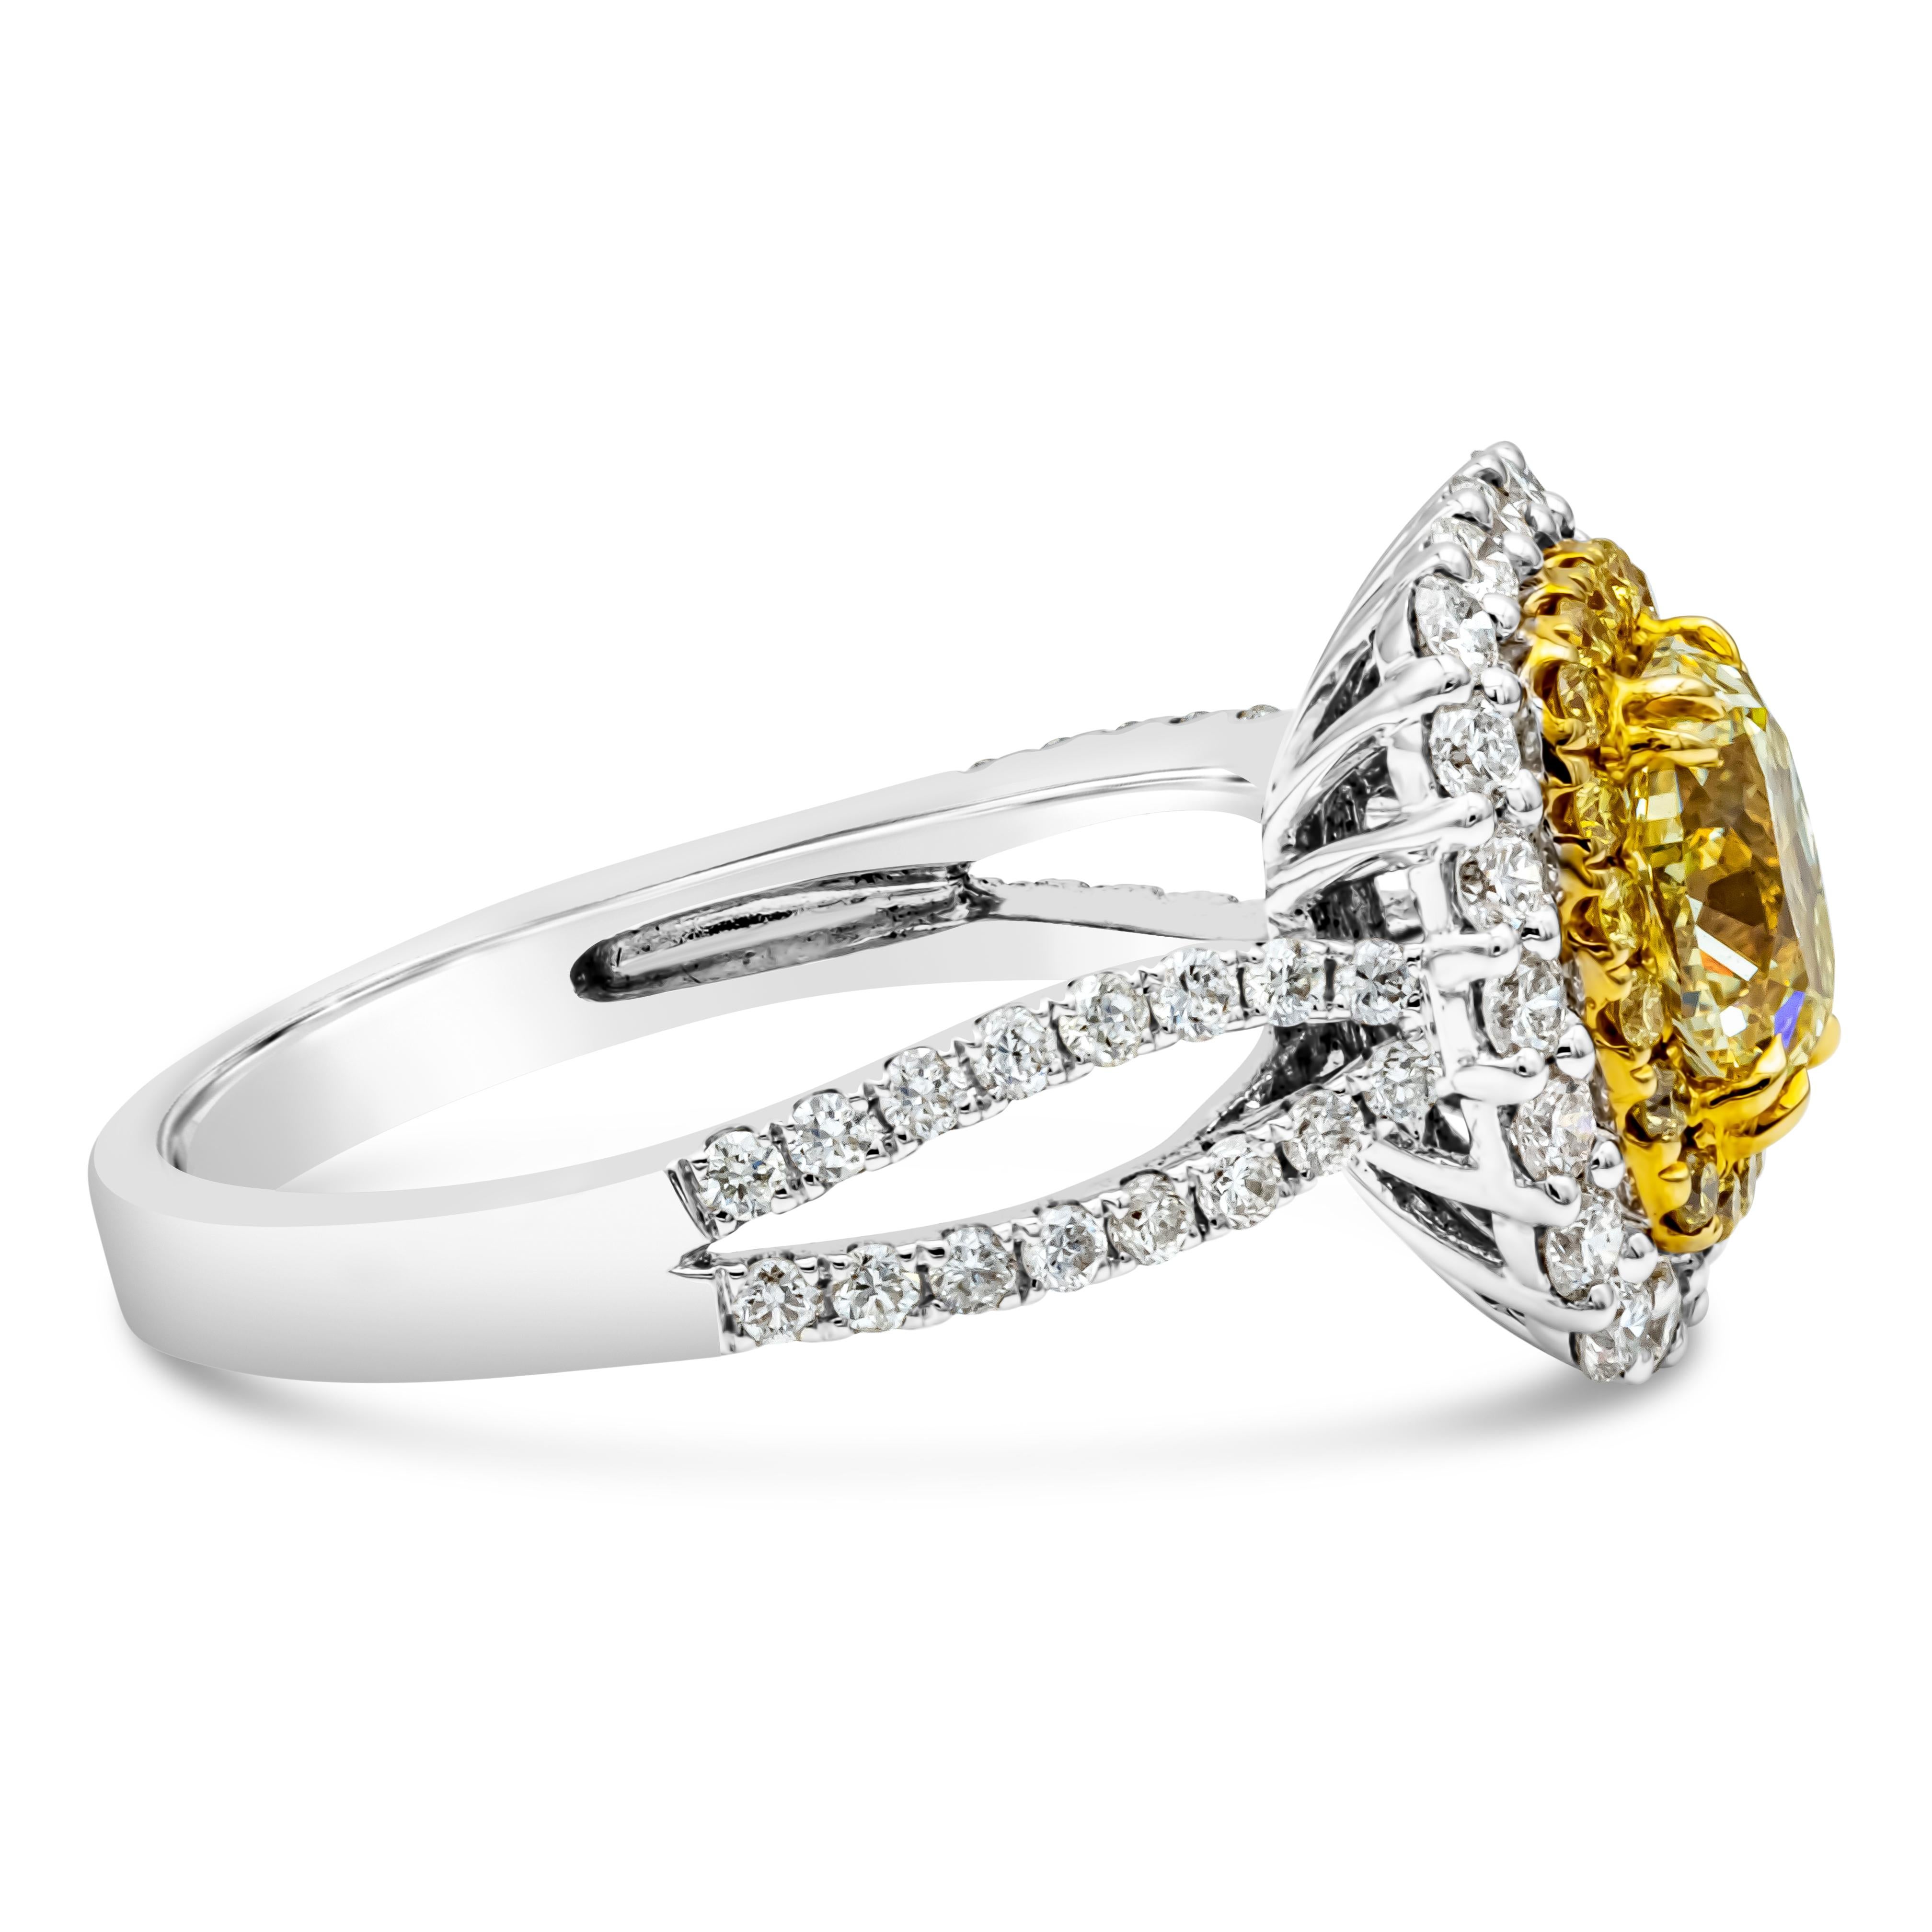 GIA Certified 1.17 Carats Oval Cut Fancy Light Yellow Diamond Engagement Ring In New Condition For Sale In New York, NY